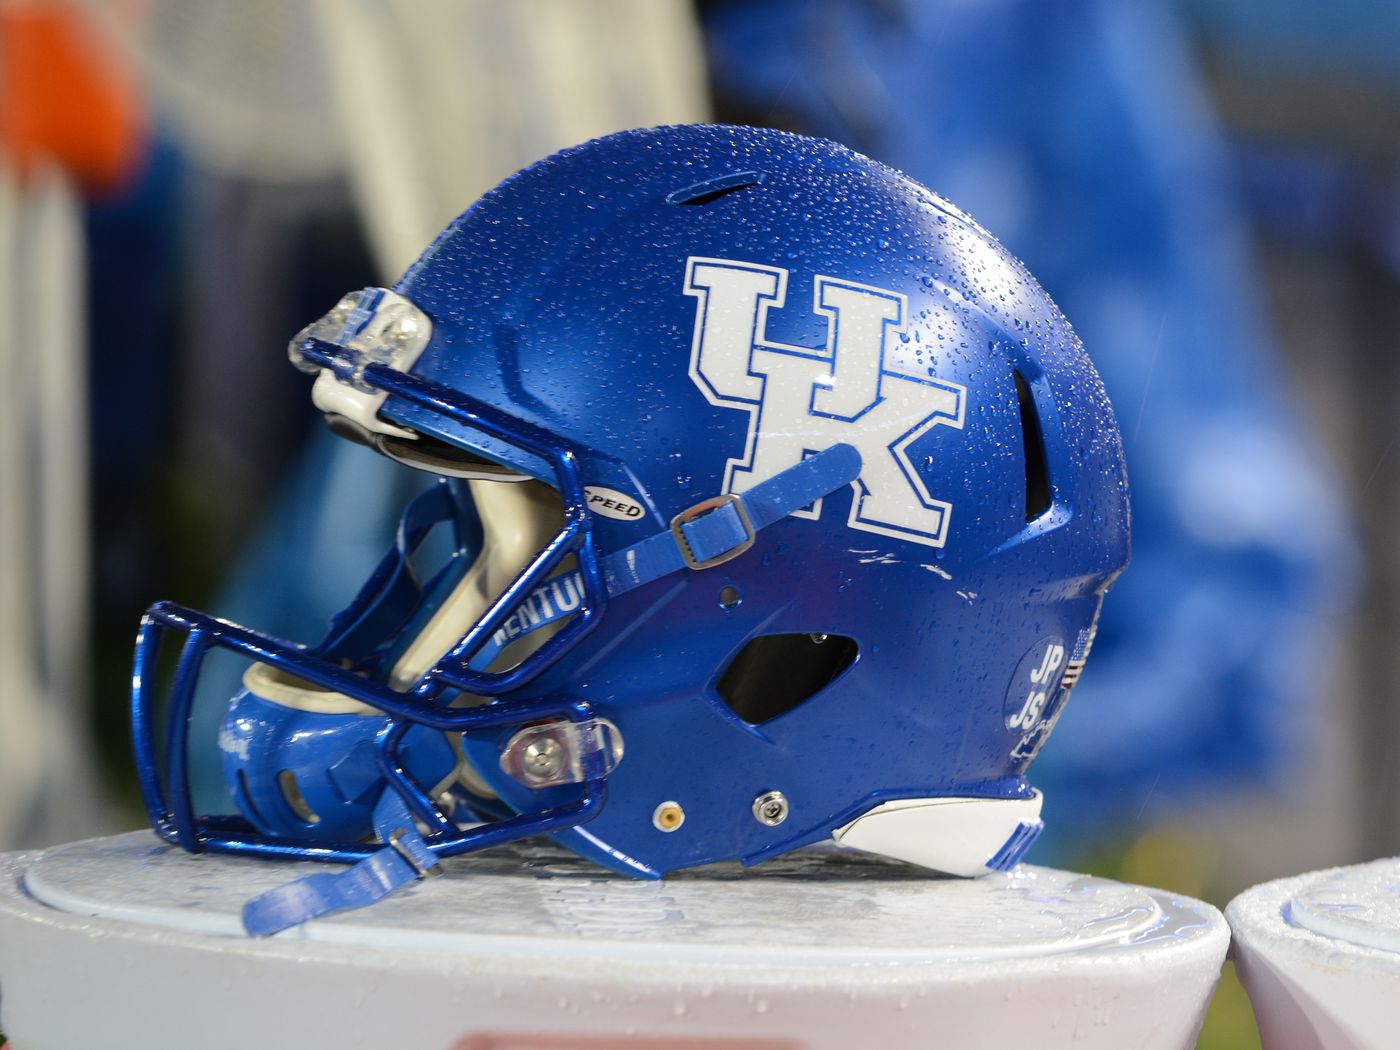 UK 2021 Football Posters to be released